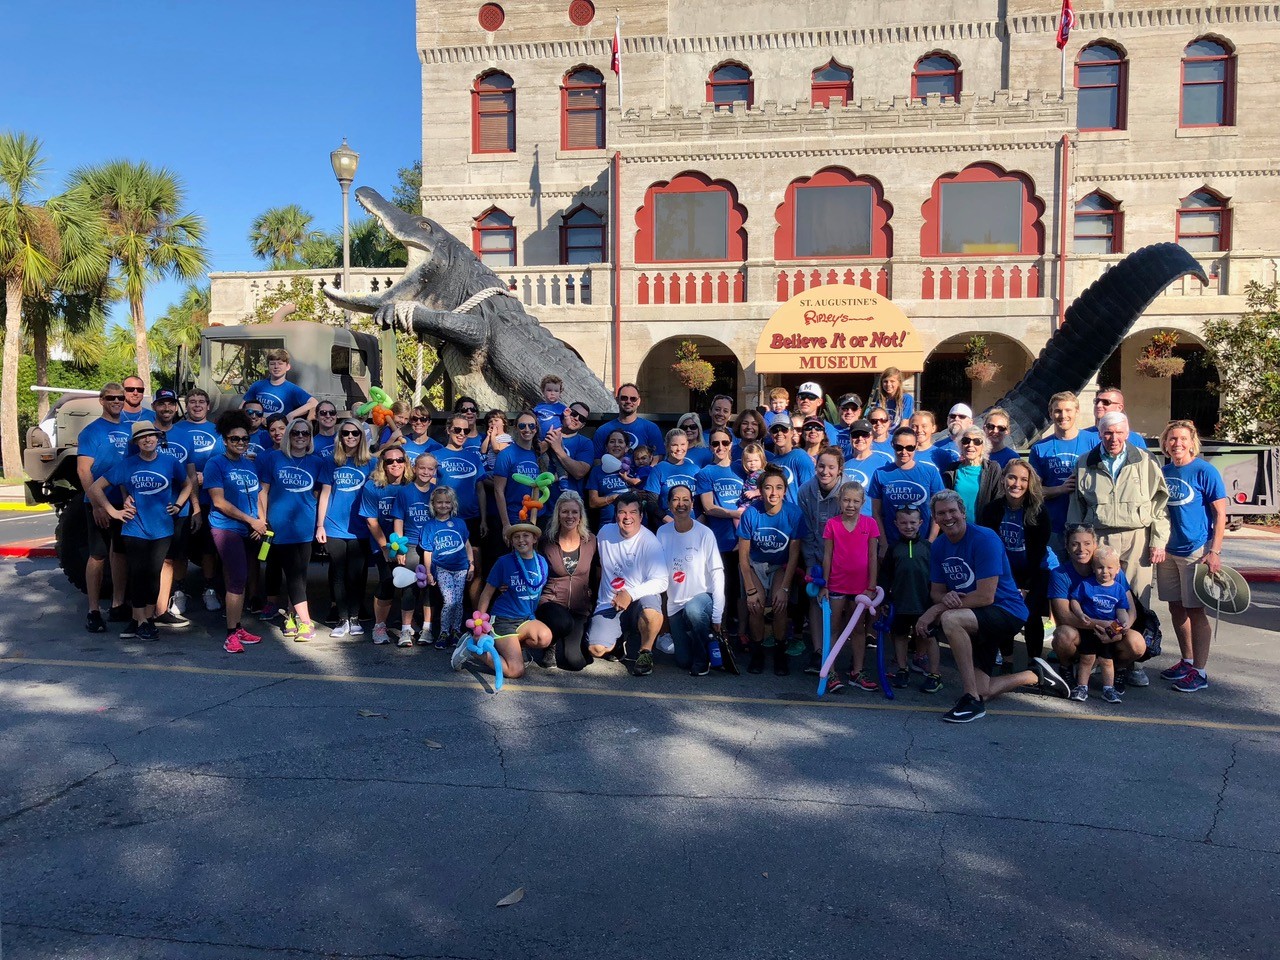 The Bailey Group, which was recently recognized as one of the healthiest companies in Northeast Florida, gathers at the Ancient City ALS Walk in St. Augustine.